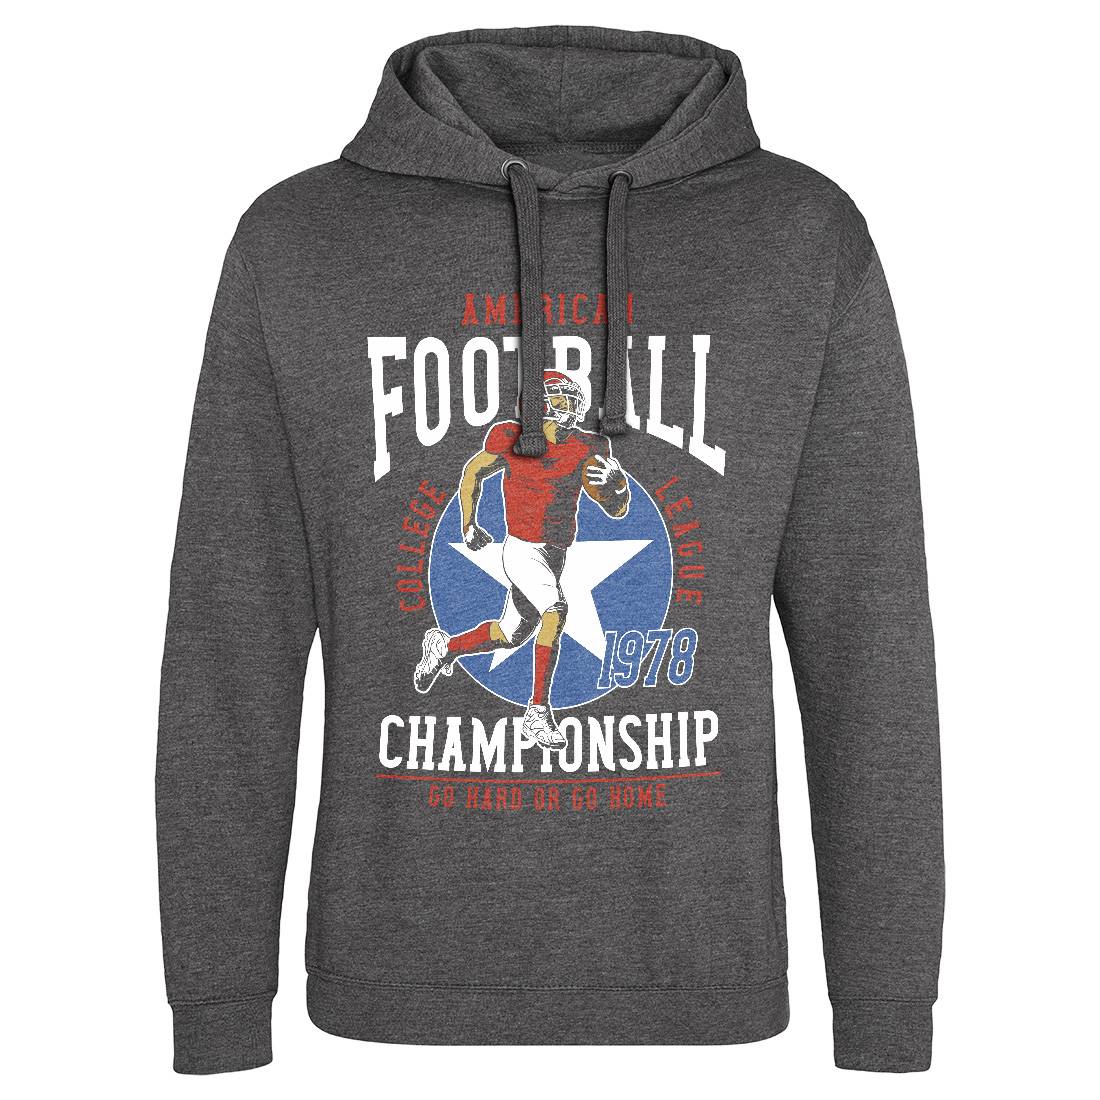 American Football Mens Hoodie Without Pocket Sport C833